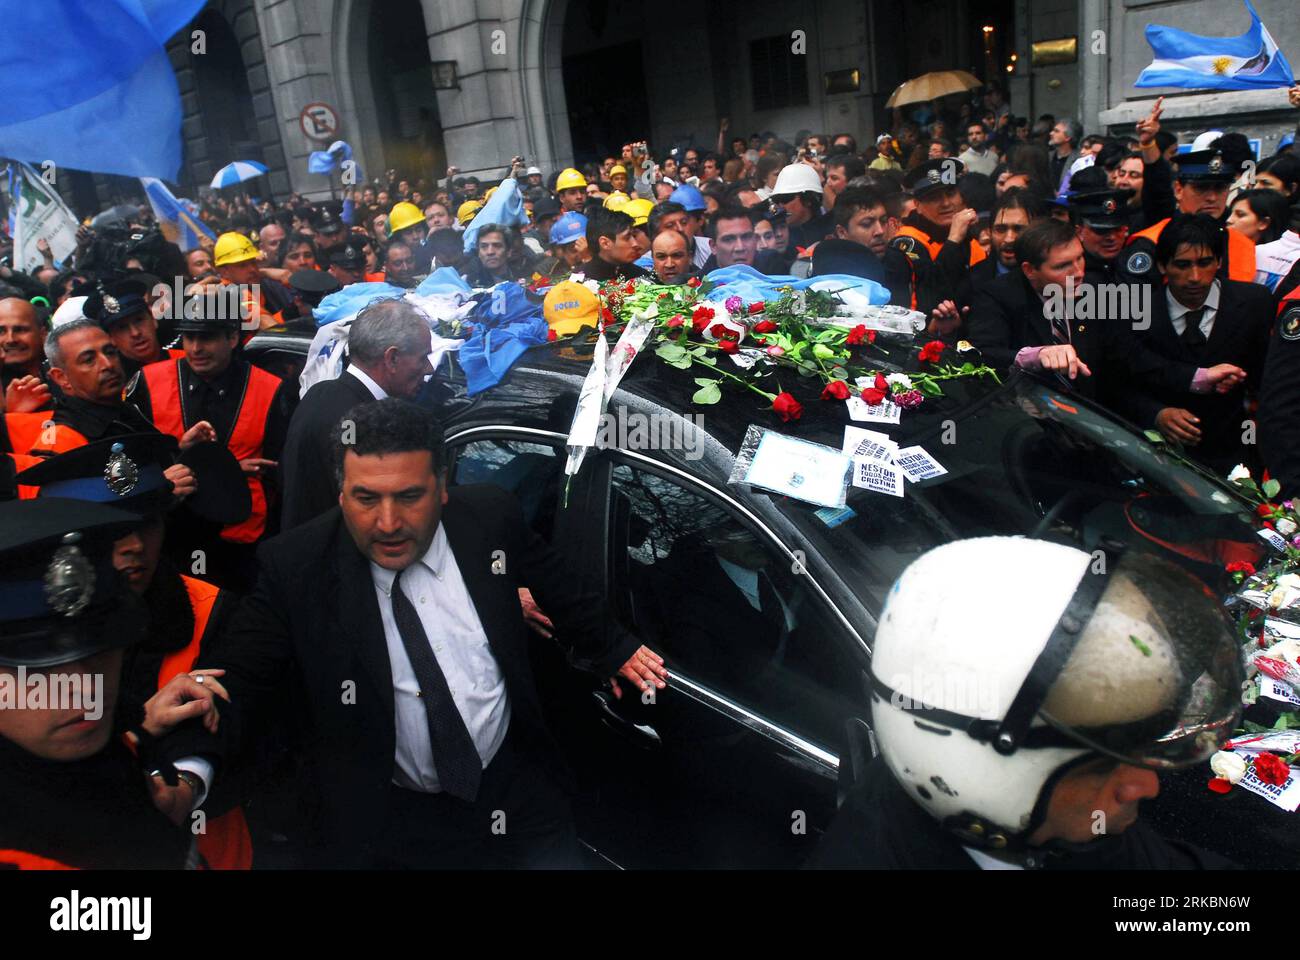 Bildnummer: 54585404  Datum: 29.10.2010  Copyright: imago/Xinhua (101029) --  BUENOS AIRES, Oct. 29, 2010 (Xinhua) -- pay respect to the hearse which carries the remains of former Argentine President Nestor Kirchner from the Casa Rosada Presidential Palace to a local airport for a flight to his home El Calafate, Province of Santa Cruz, where he will be buried in his family cemetery, Oct. 29, 2010. (Xinhua/Luciano Thieberger) ARGENTINA-BUENOS AIRES-KIRCHNER-FUNERAL PUBLICATIONxNOTxINxCHN People Politik Beerdigung Trauer Kirchner premiumd kbdig xcb 2010 quer    Bildnummer 54585404 Date 29 10 201 Stock Photo